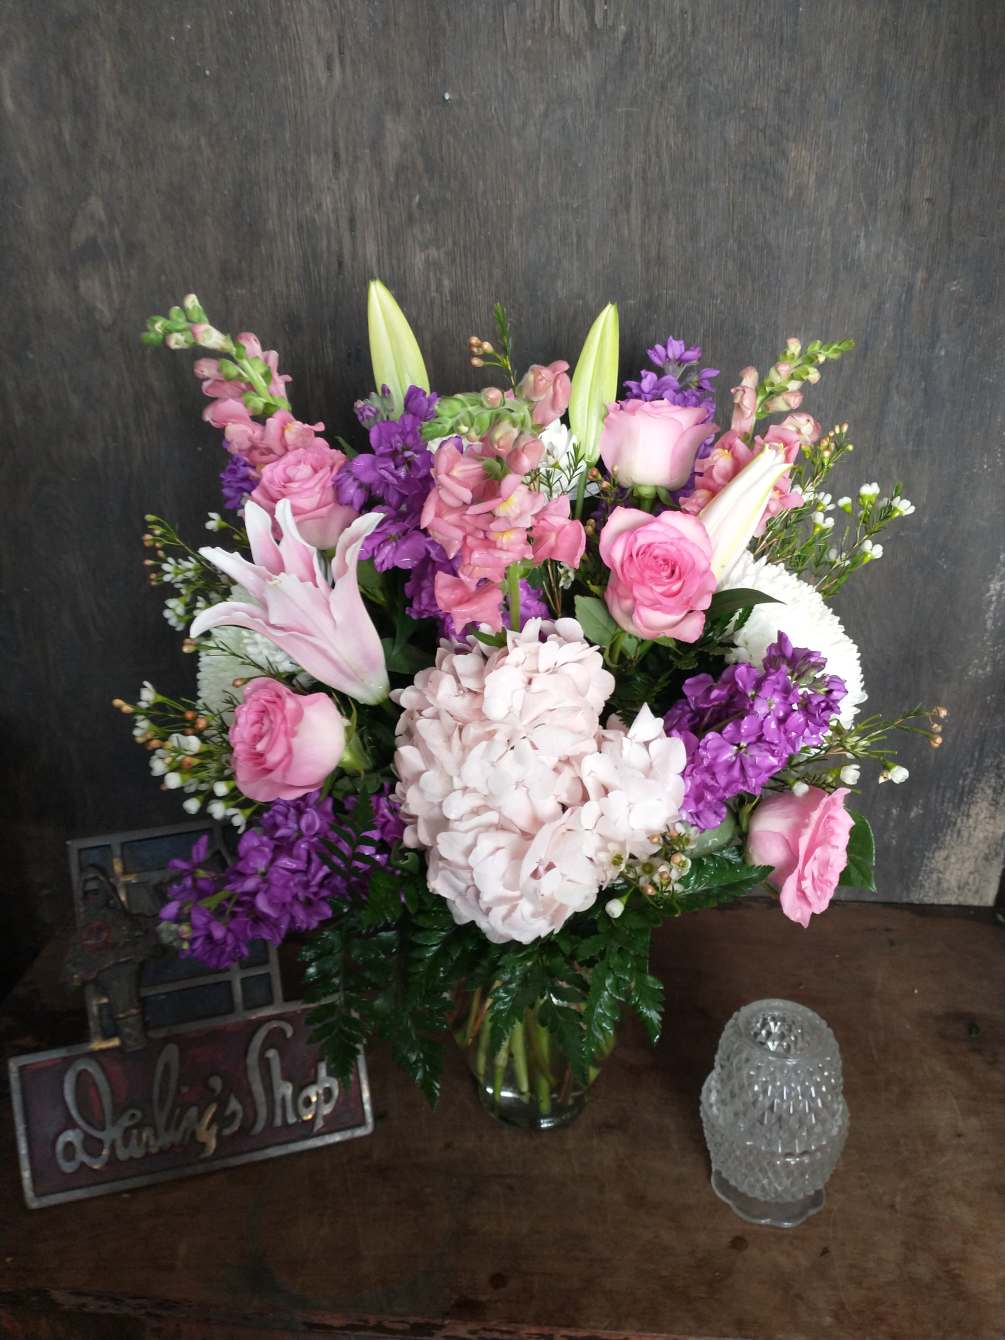 Snaps, stock, lilies, hydrangea and more